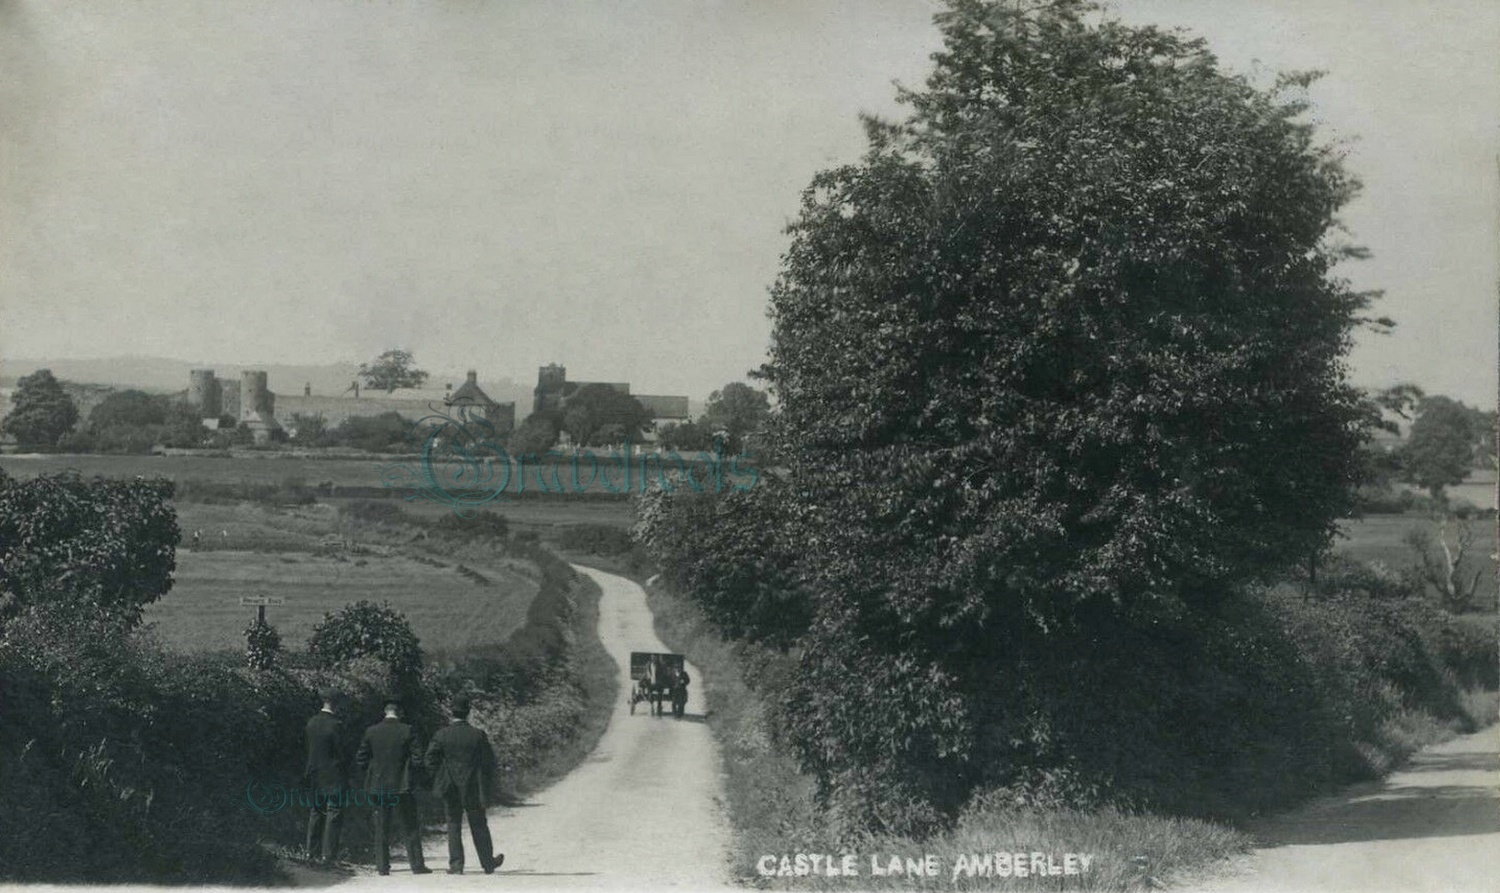 Old photos of Castle Lane, Amberley - click image below to return